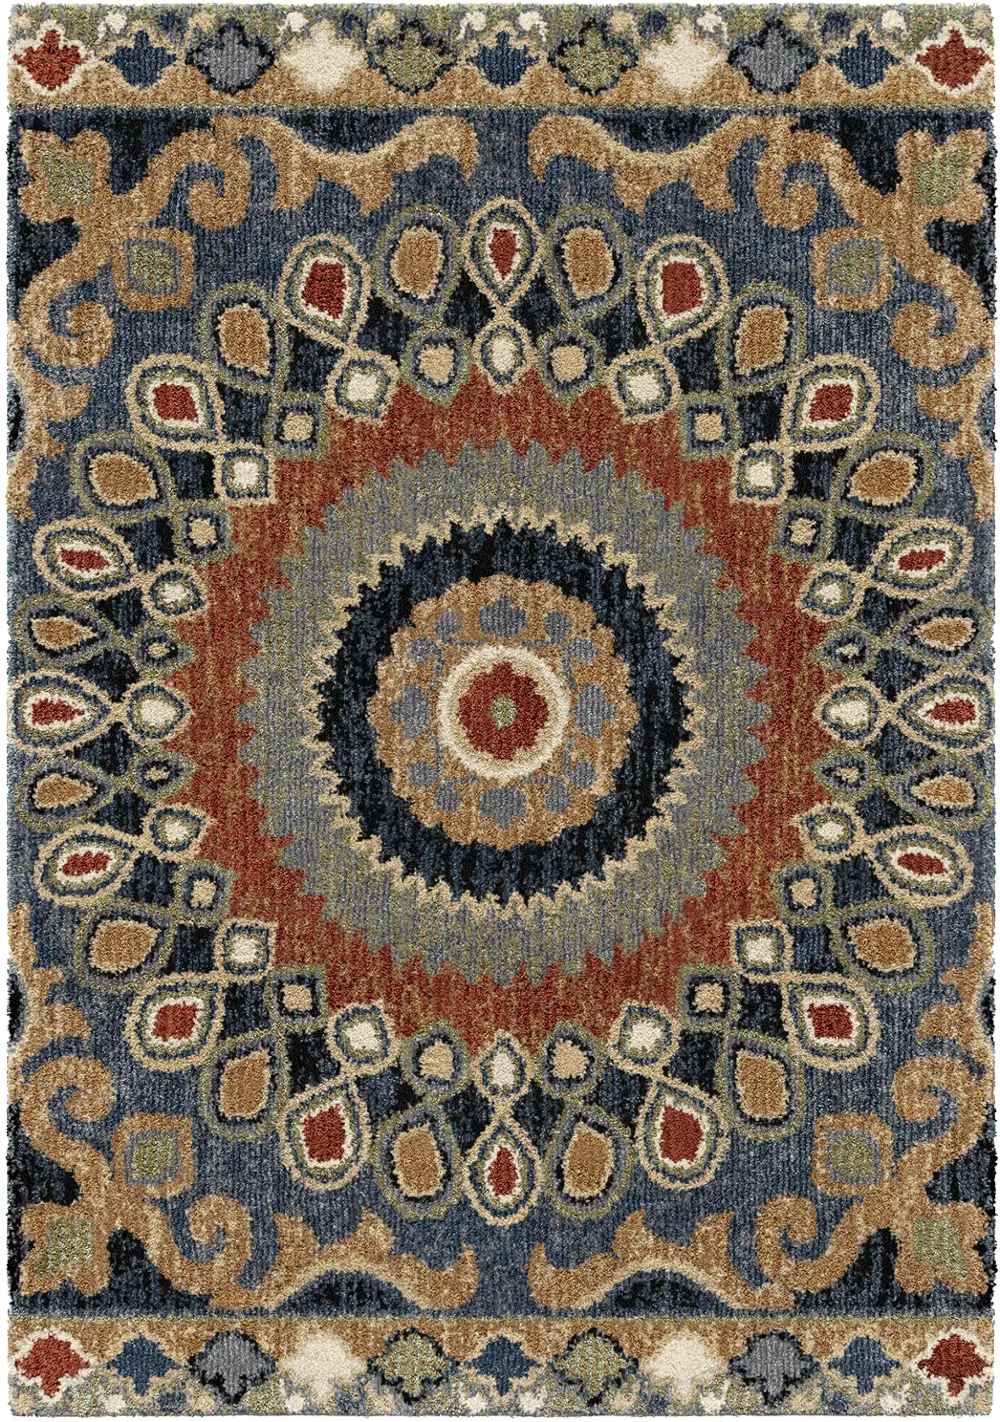 4412/5X8/WILDWEAVE Wild Weave 5 x 8 Blue, Red, and Green Area Rug-1